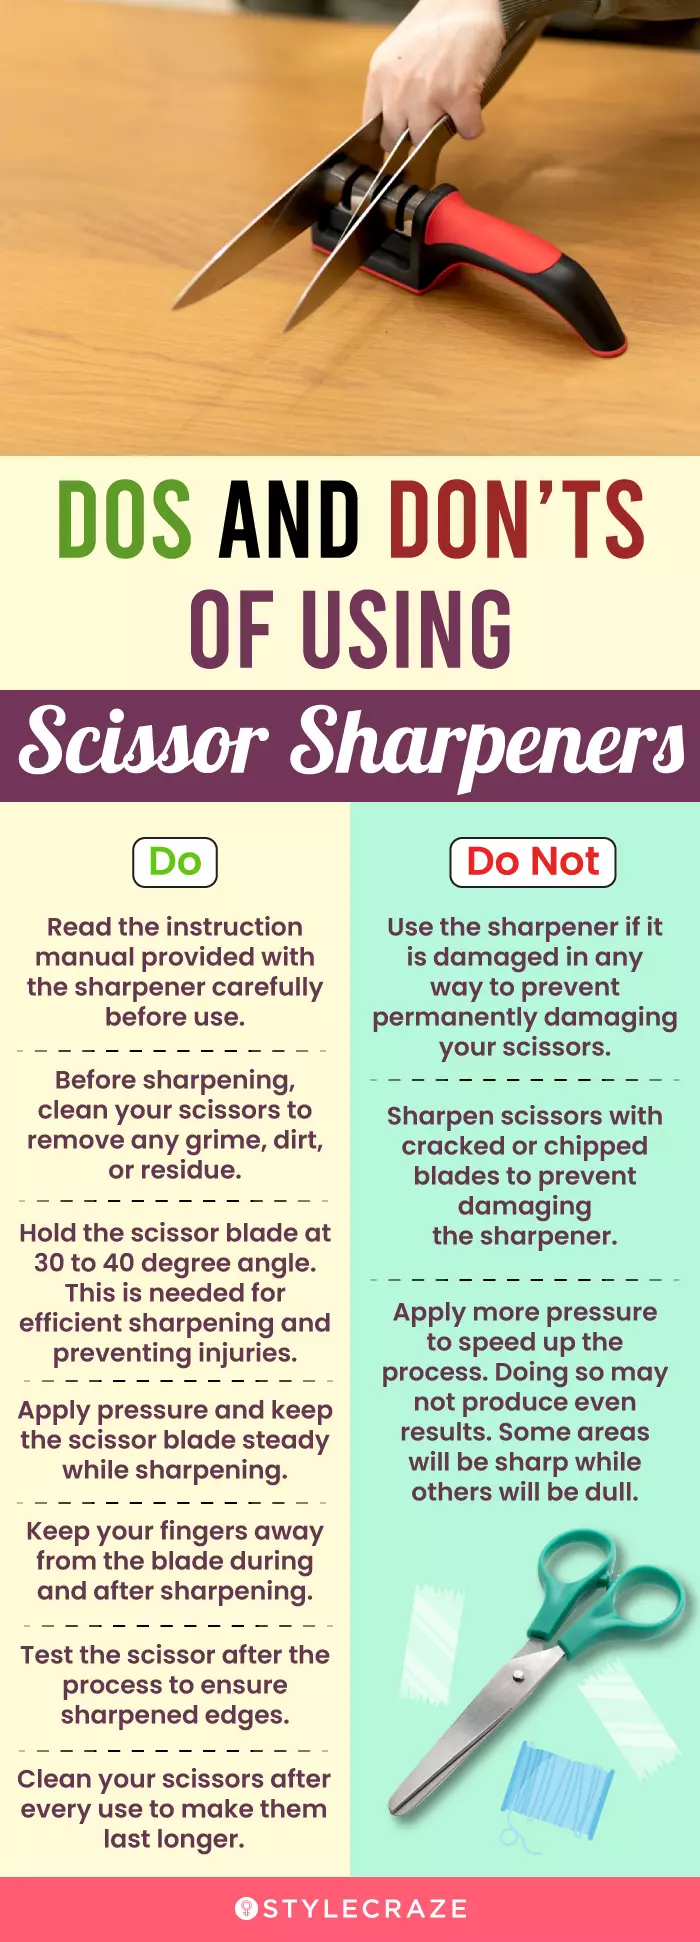 Dos And Don’ts Of Using Scissor Sharpeners(infographic)